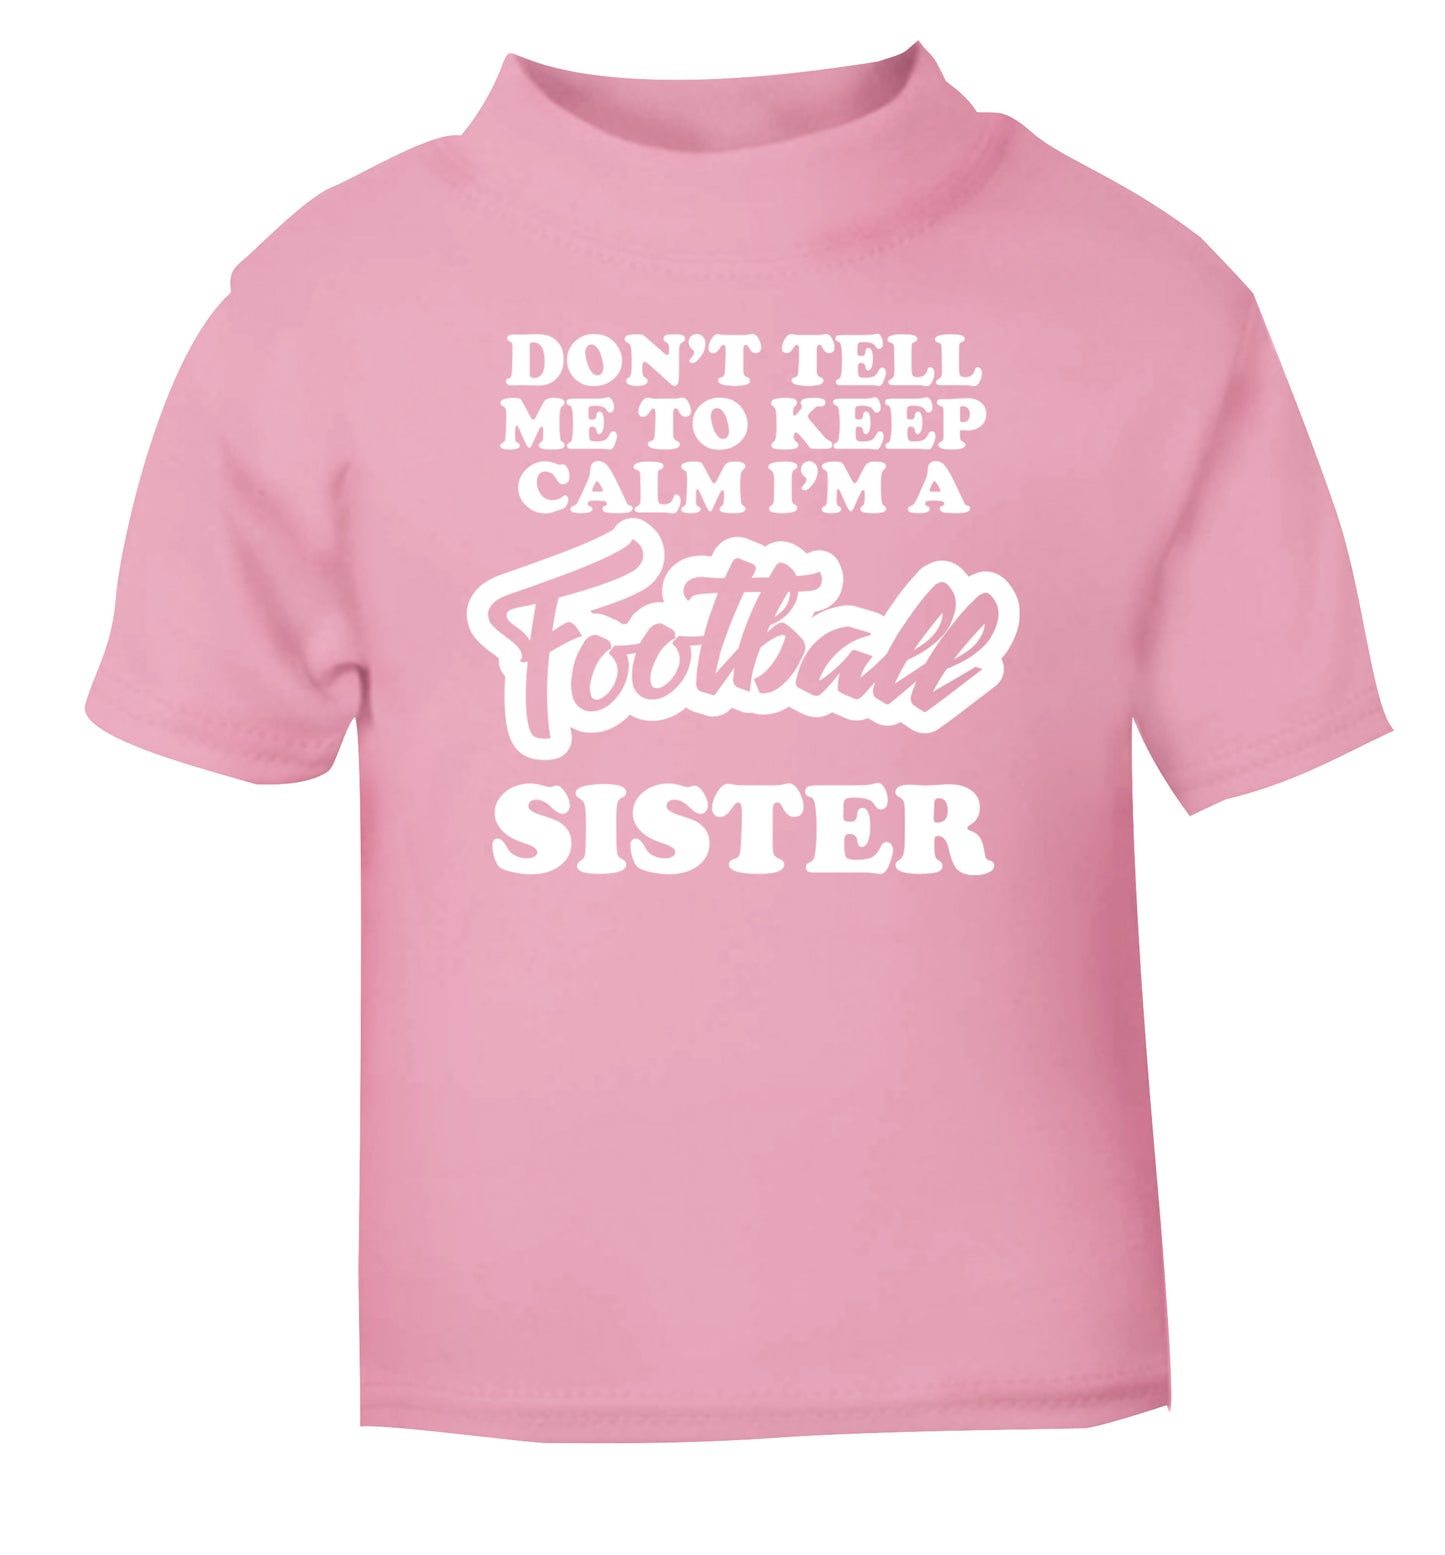 Don't tell me to keep calm I'm a football sister light pink Baby Toddler Tshirt 2 Years